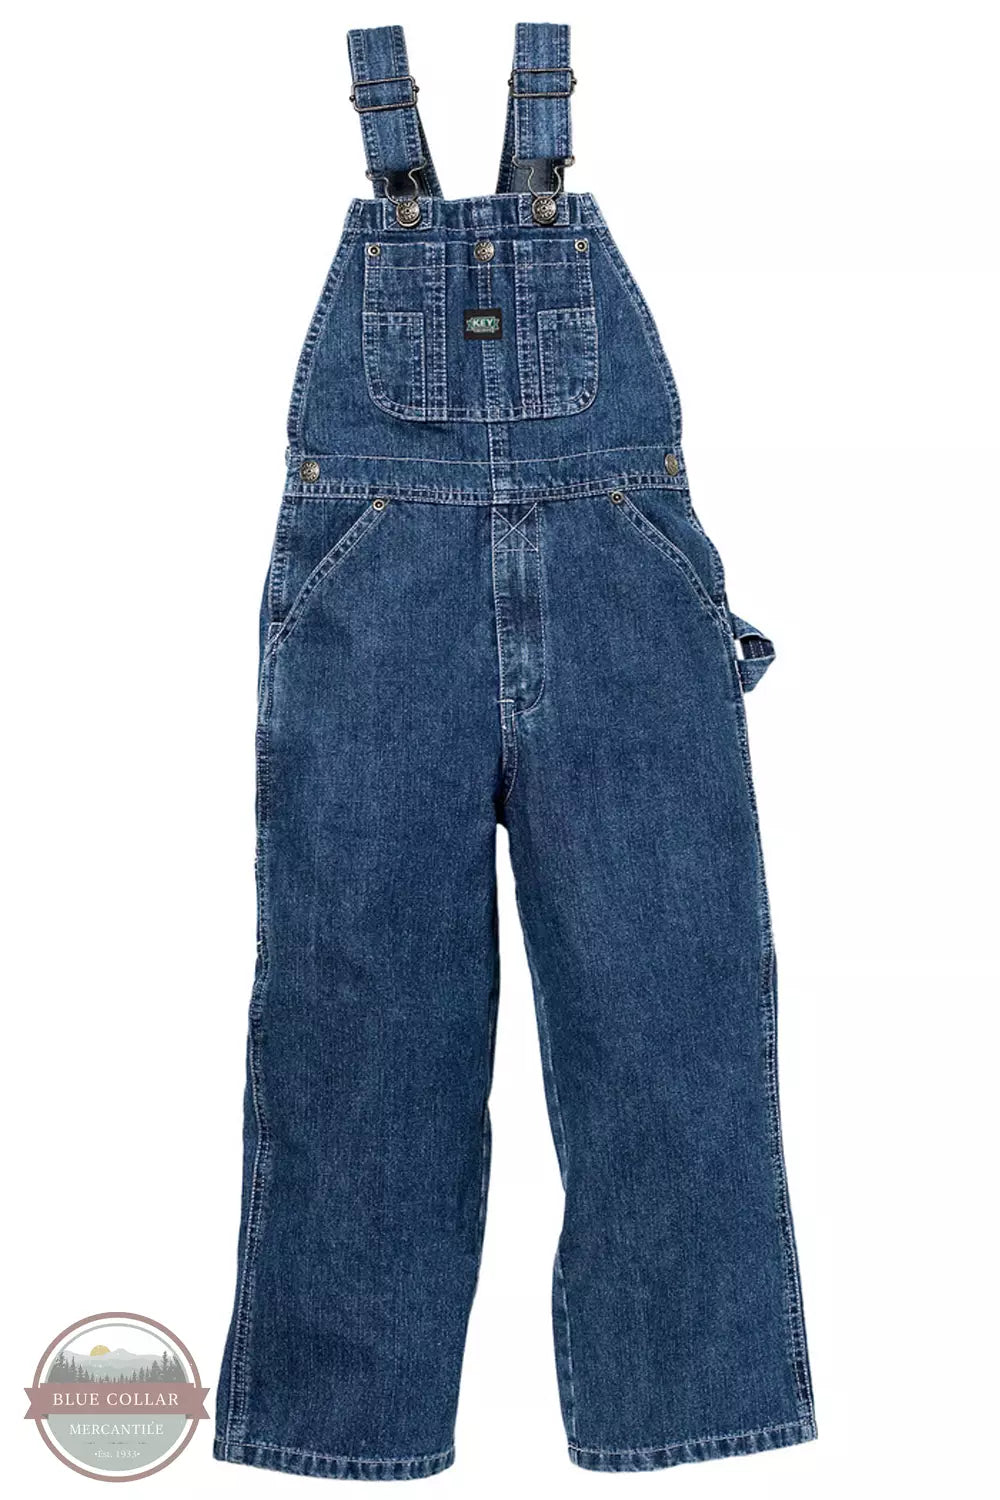 Key 226.45 Youth Bib Overalls in Denim Front View